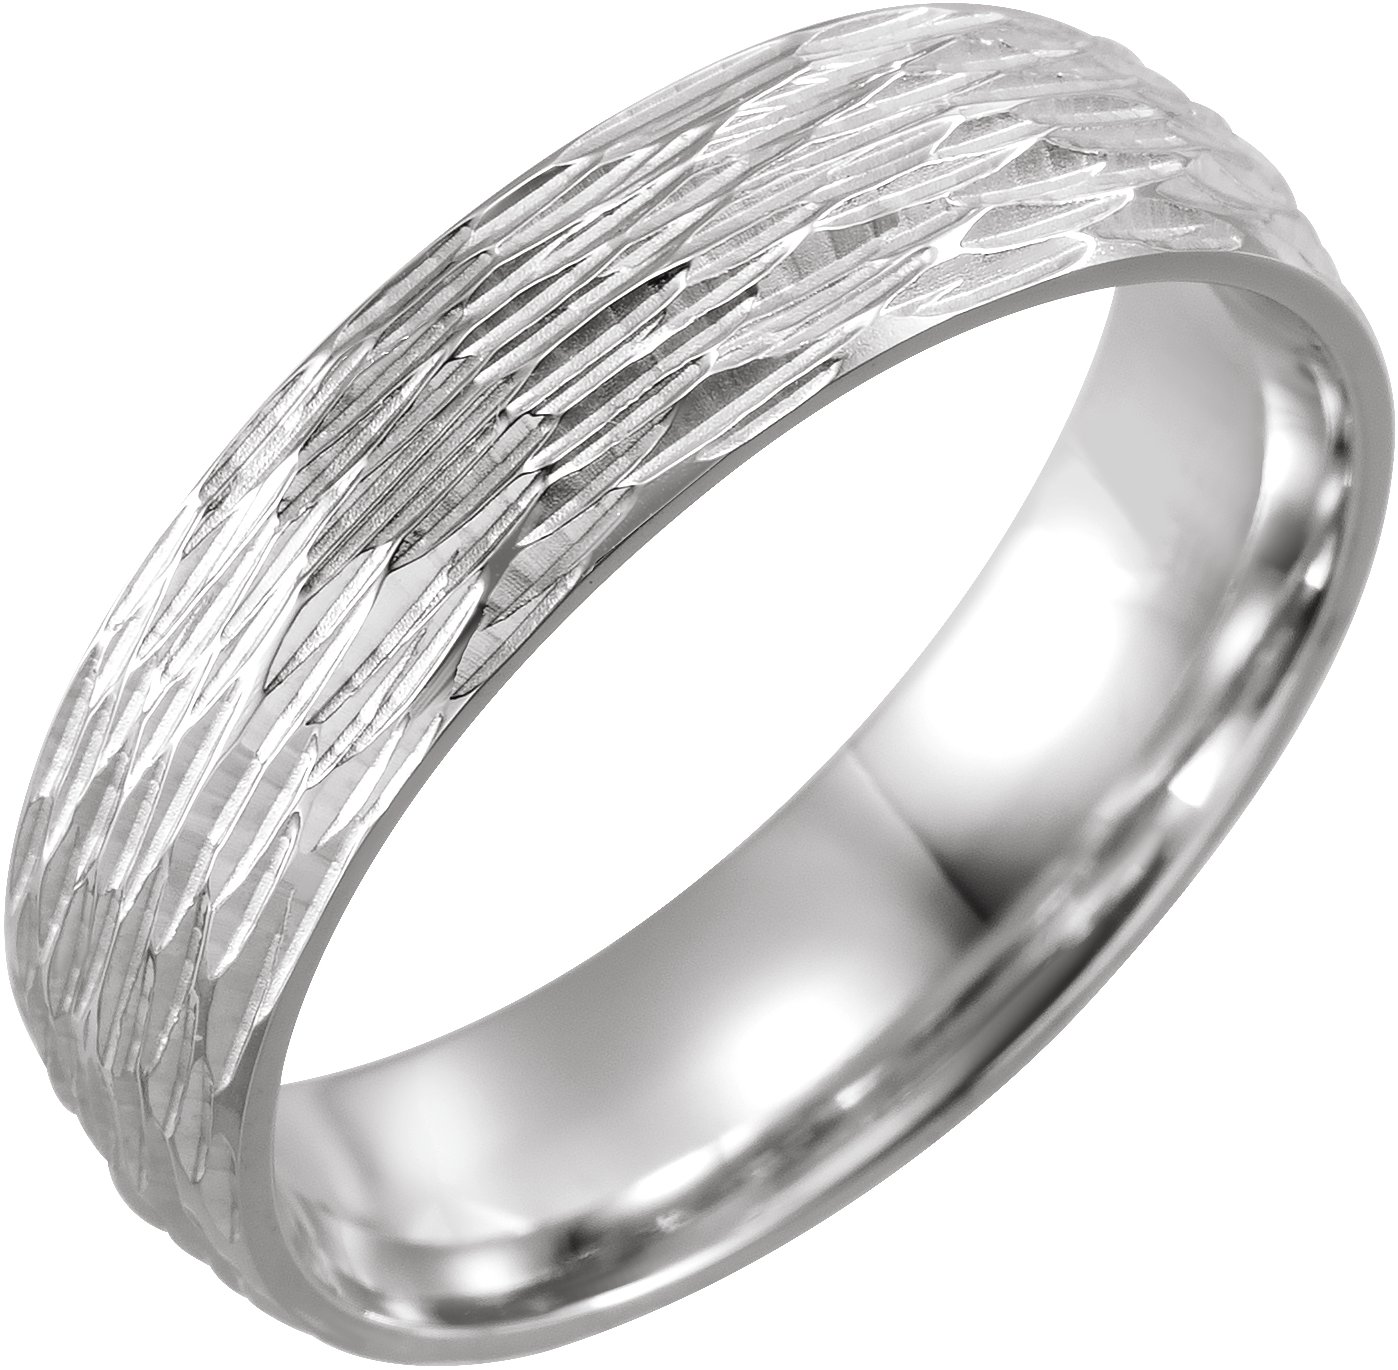 Sterling Silver 6 mm Tree Bark Pattern Band Size 16 Ref 16341250